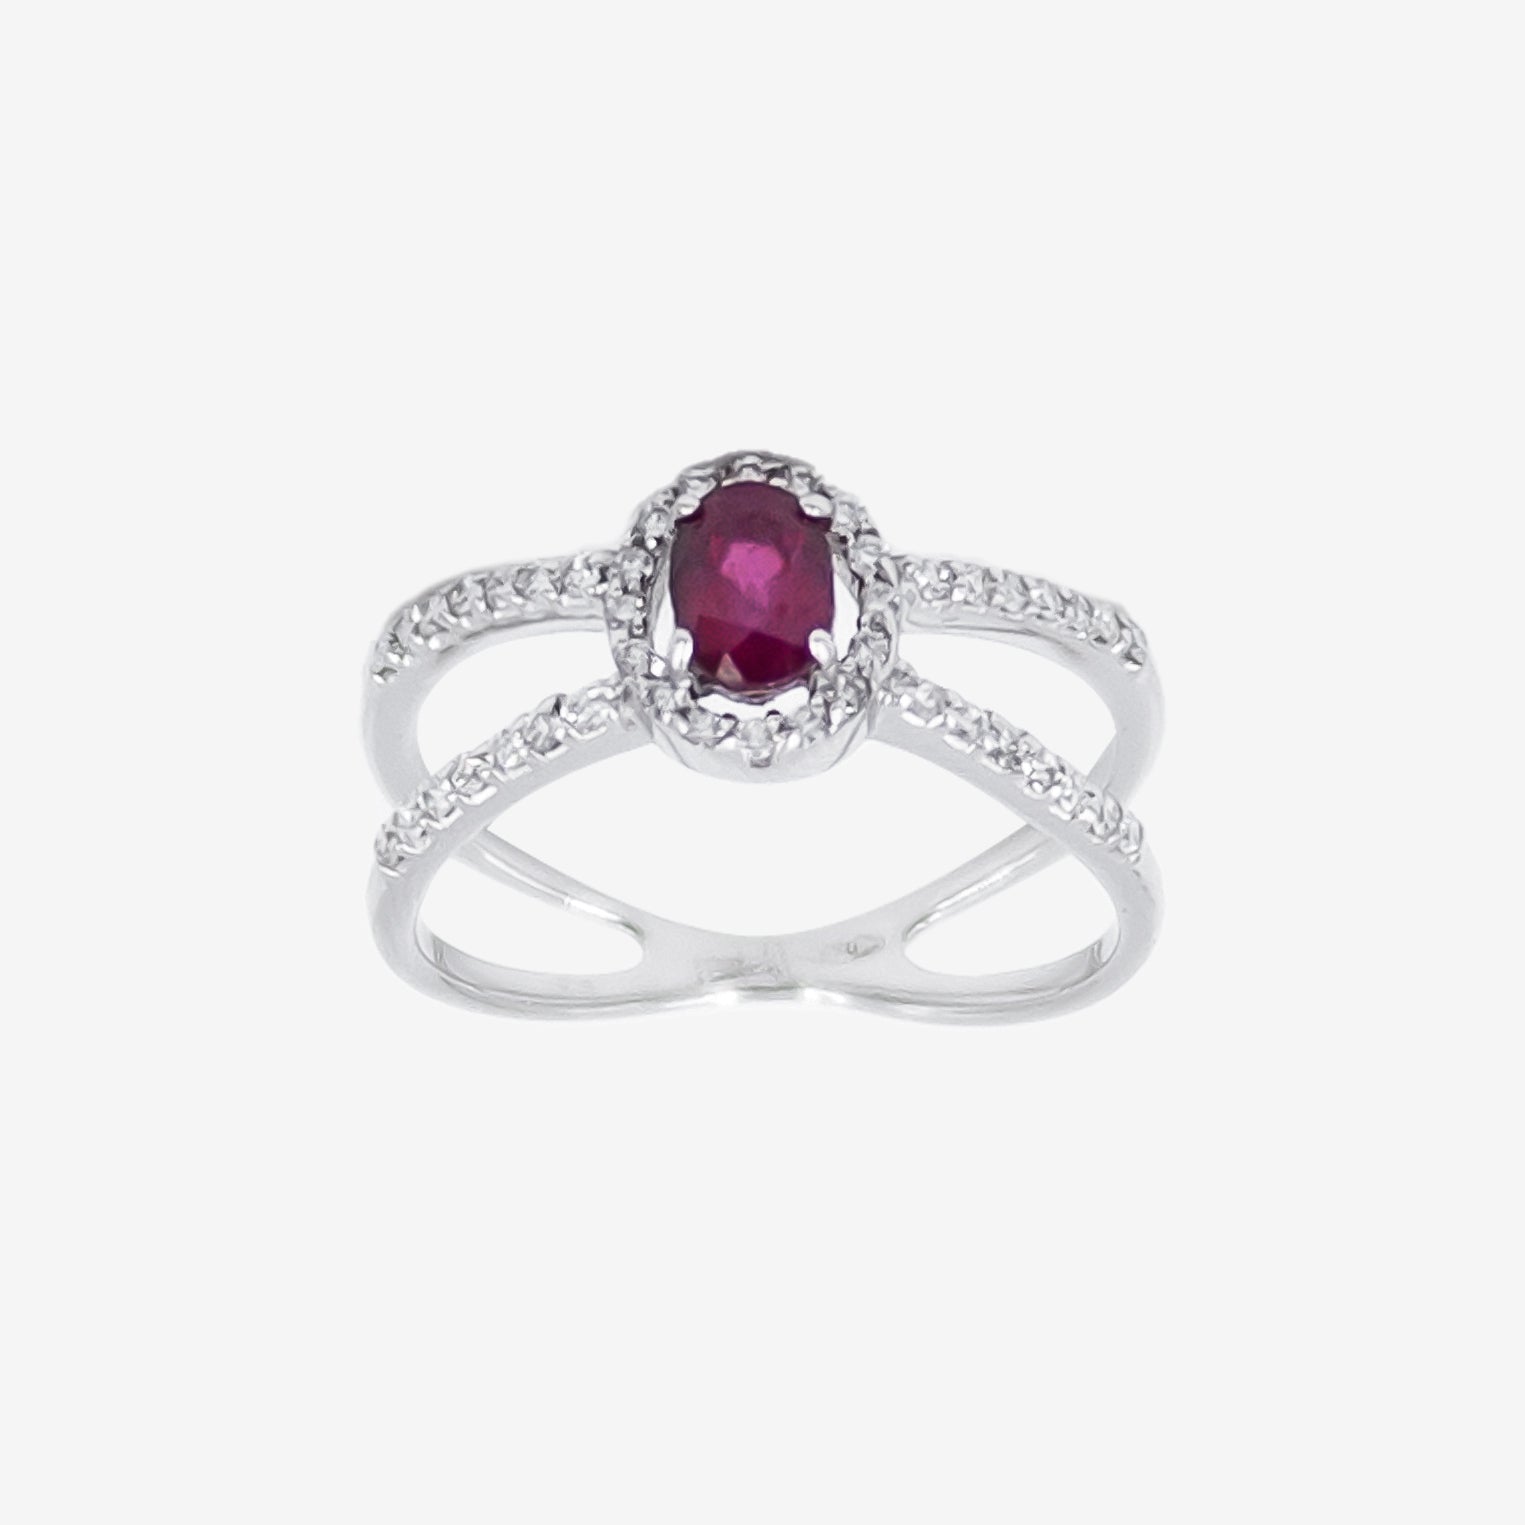 Swirl Ring with Diamonds and Central Ruby